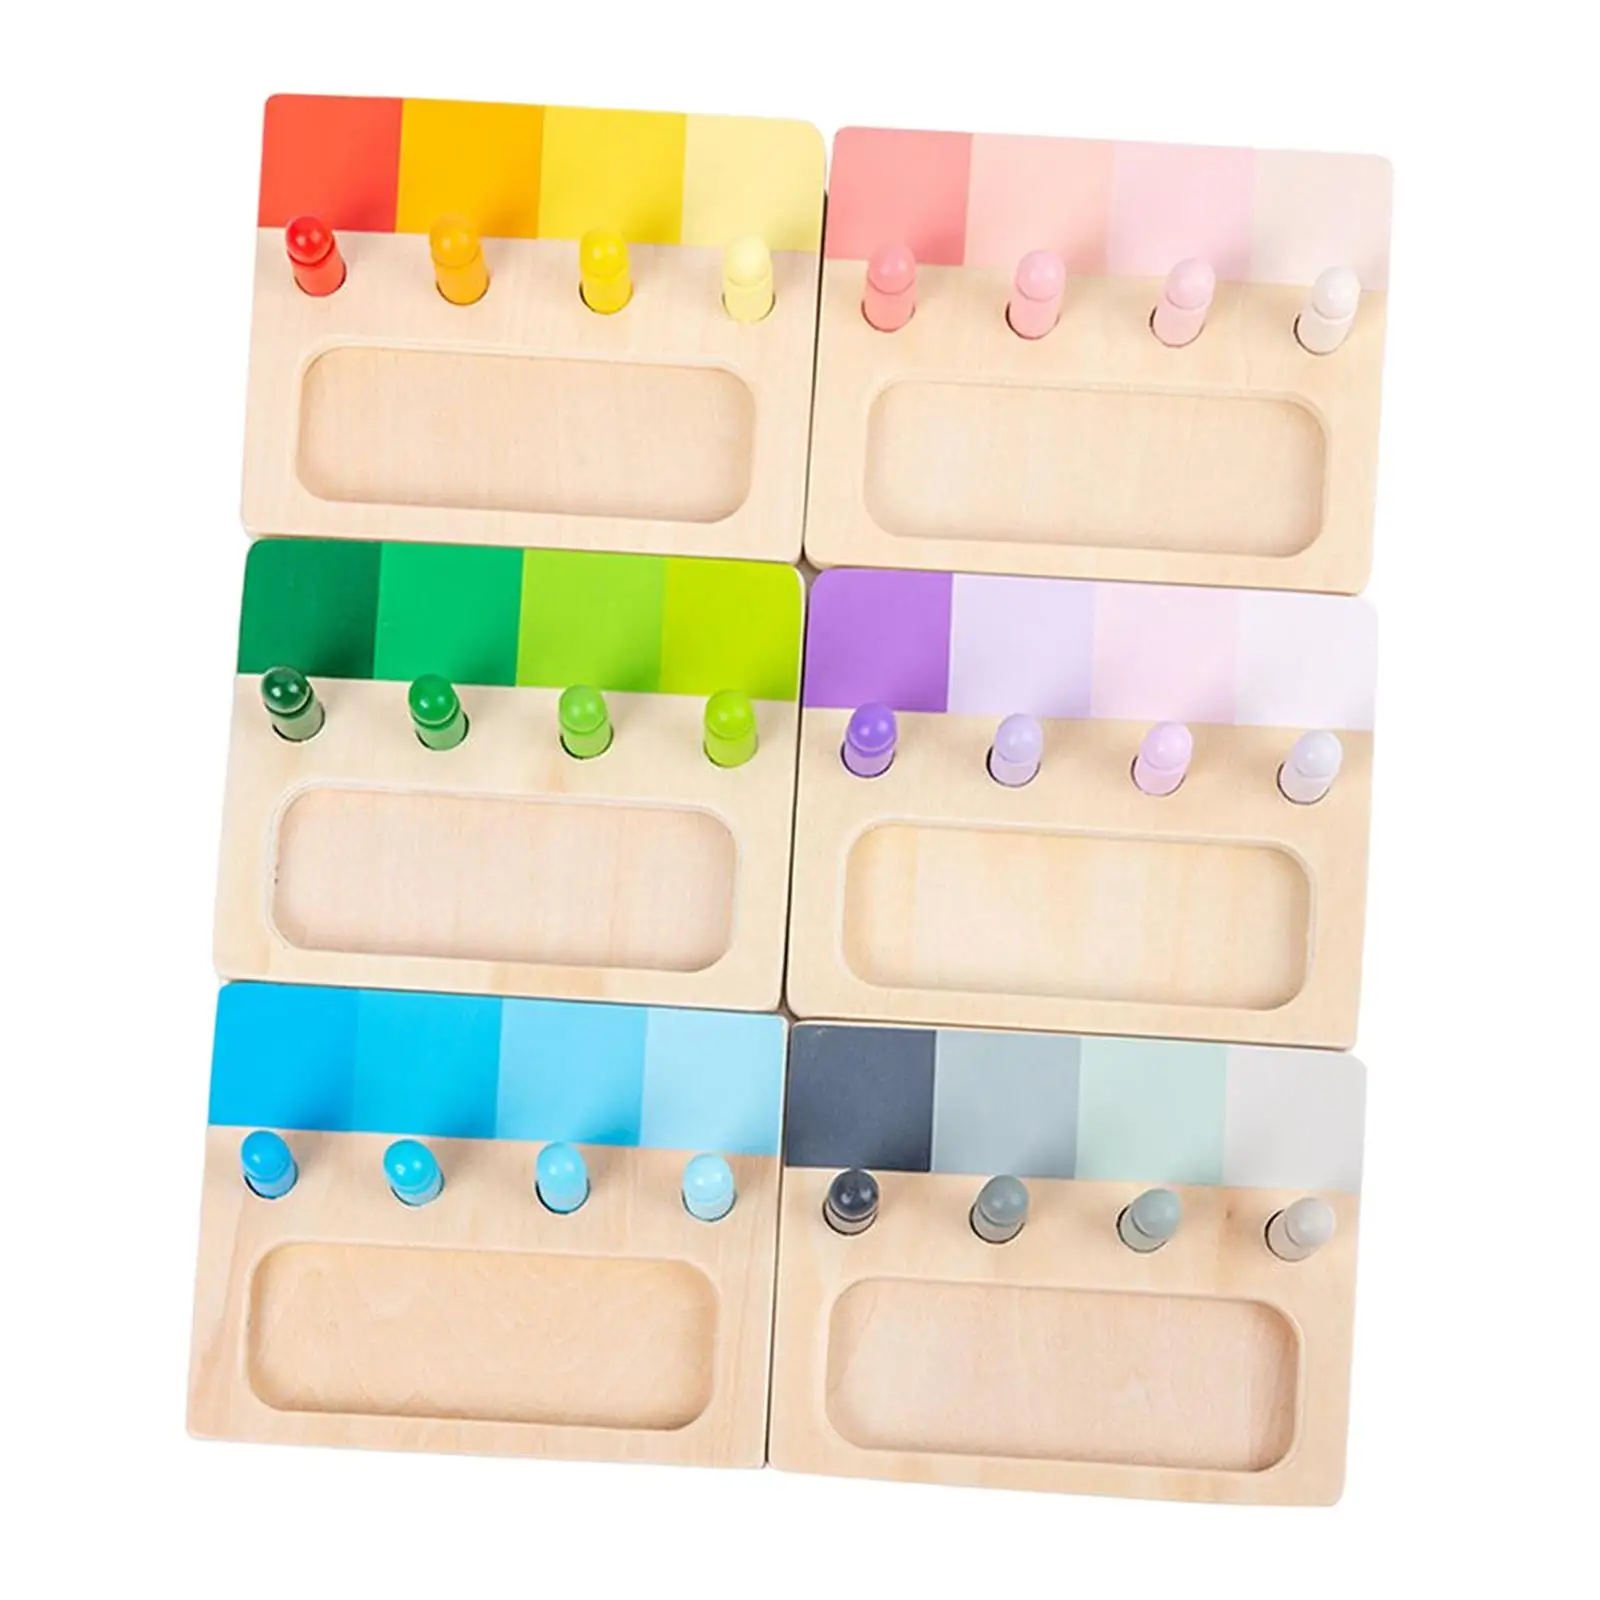 6x Montessori Color Matching Toy with Chess Early Learning Toys Color Resemblance Sorting Task for Teaching Learning Interaction